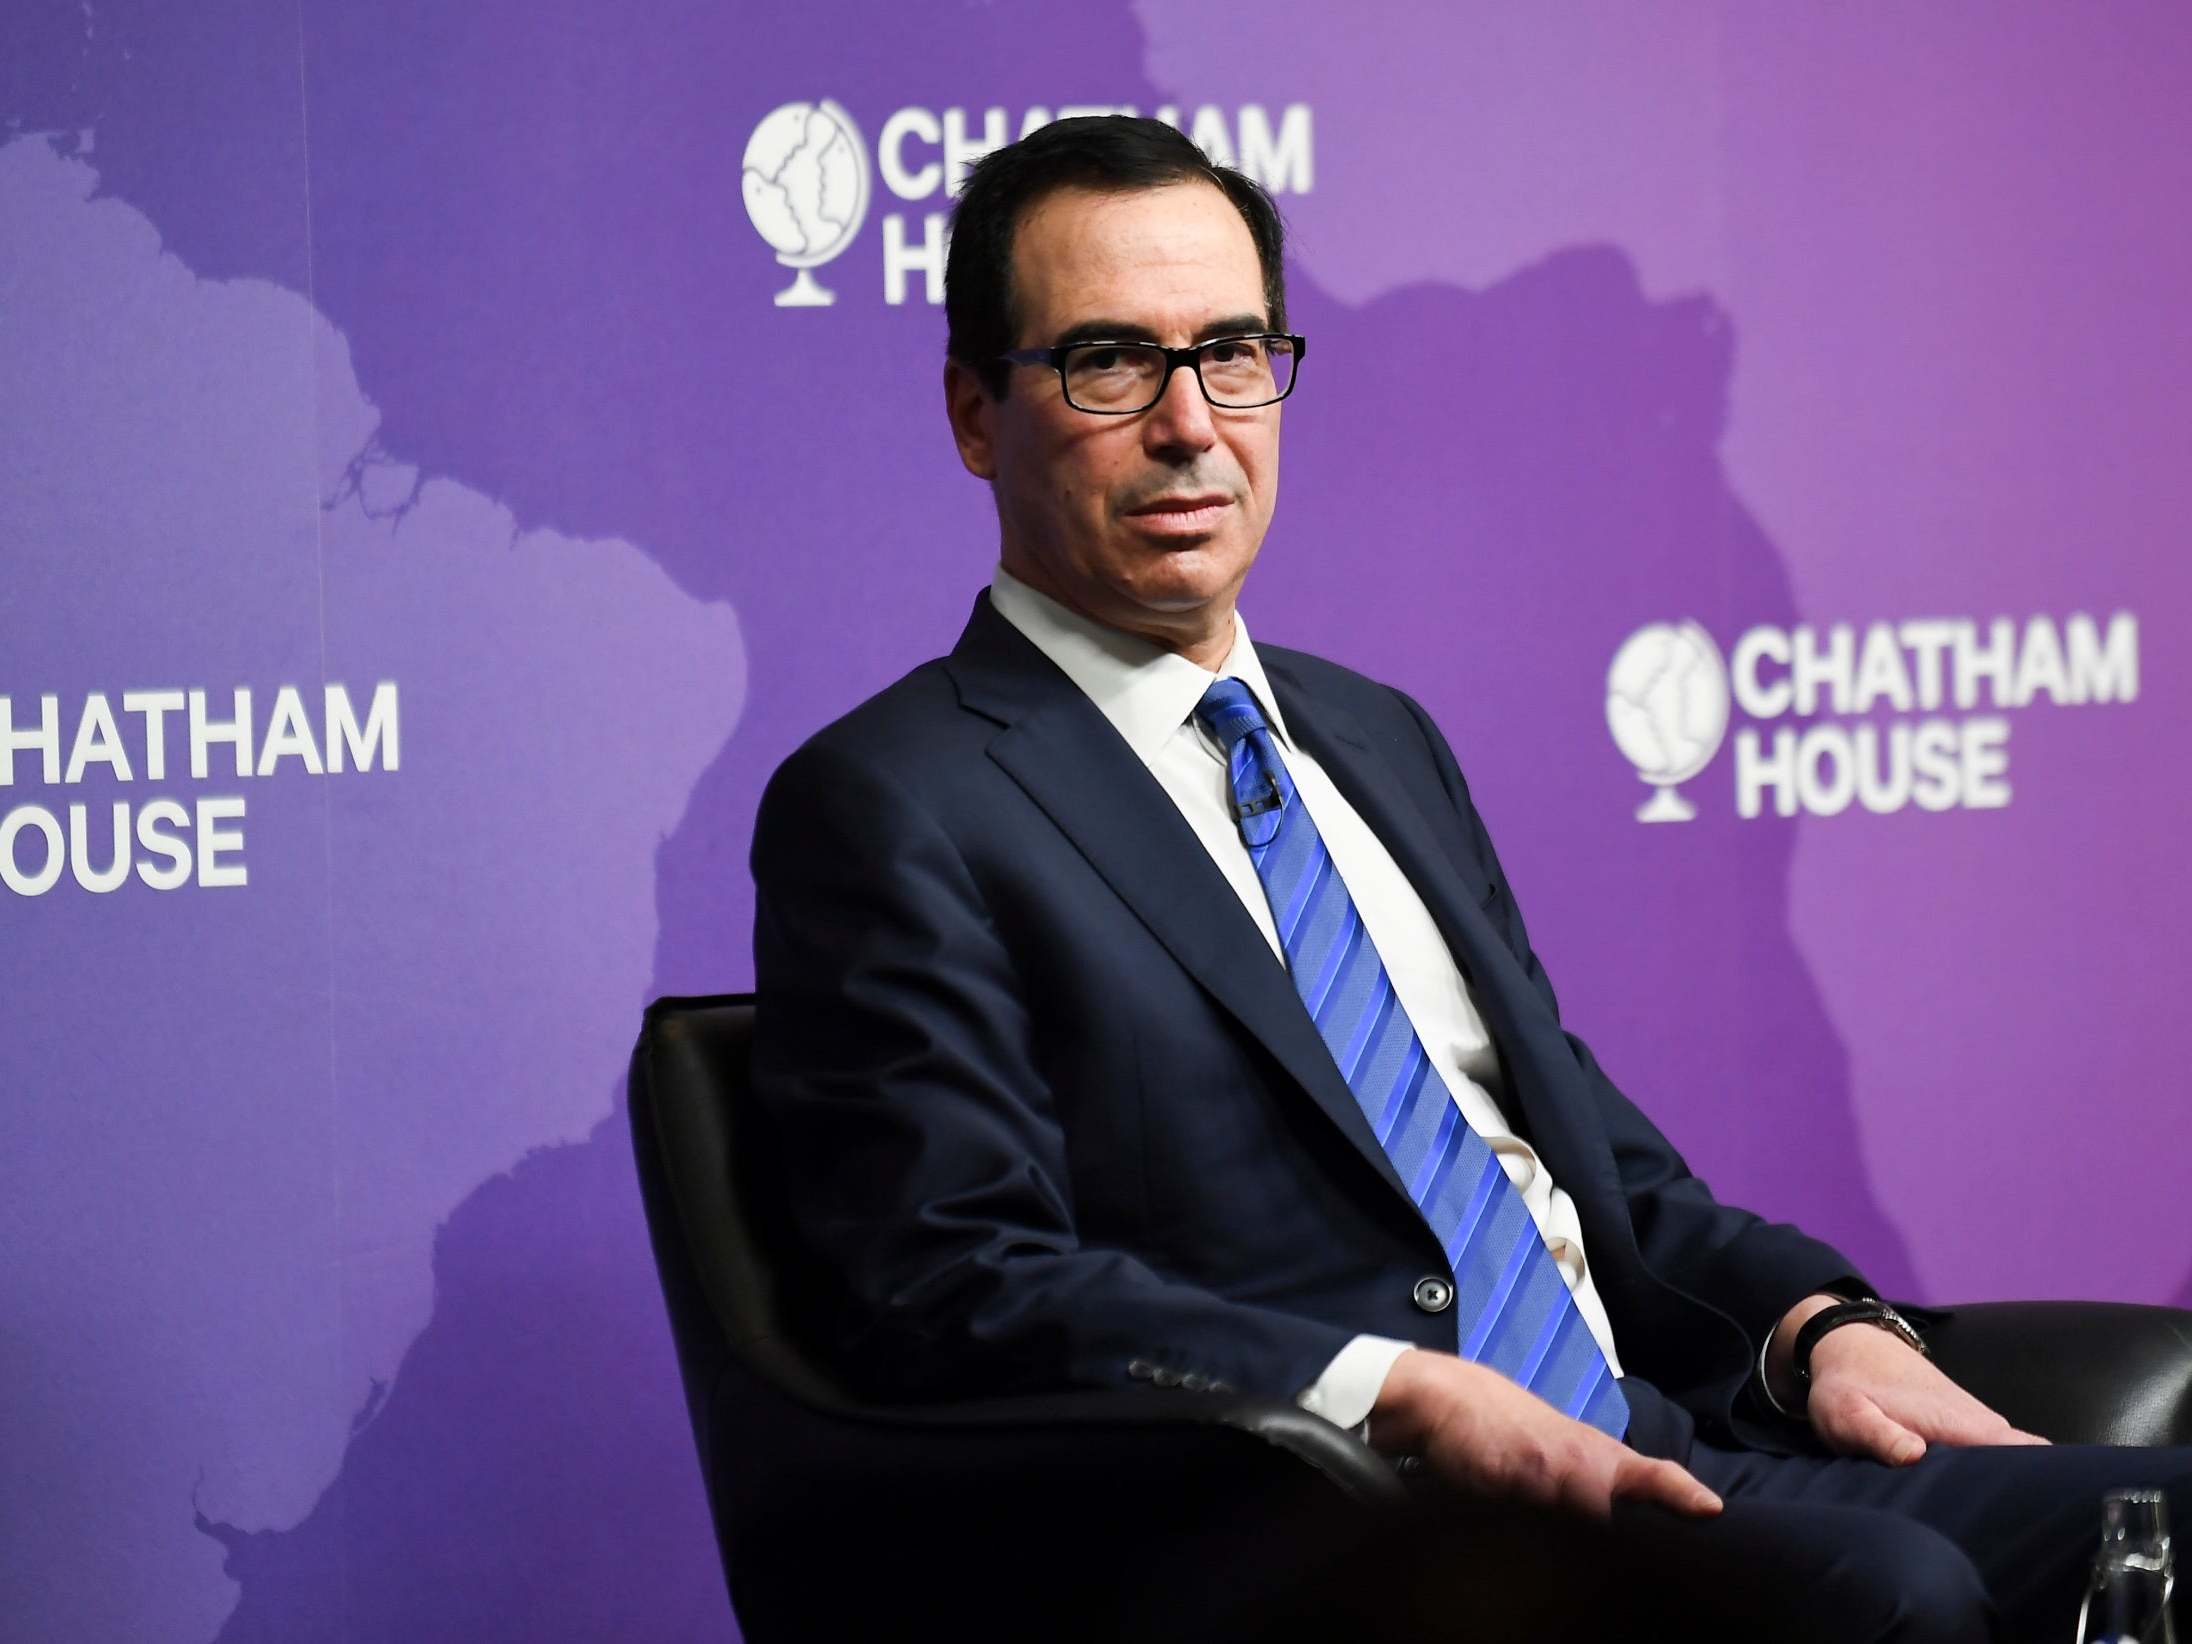 The US Treasury secretary says issues with Europe must be resolved first